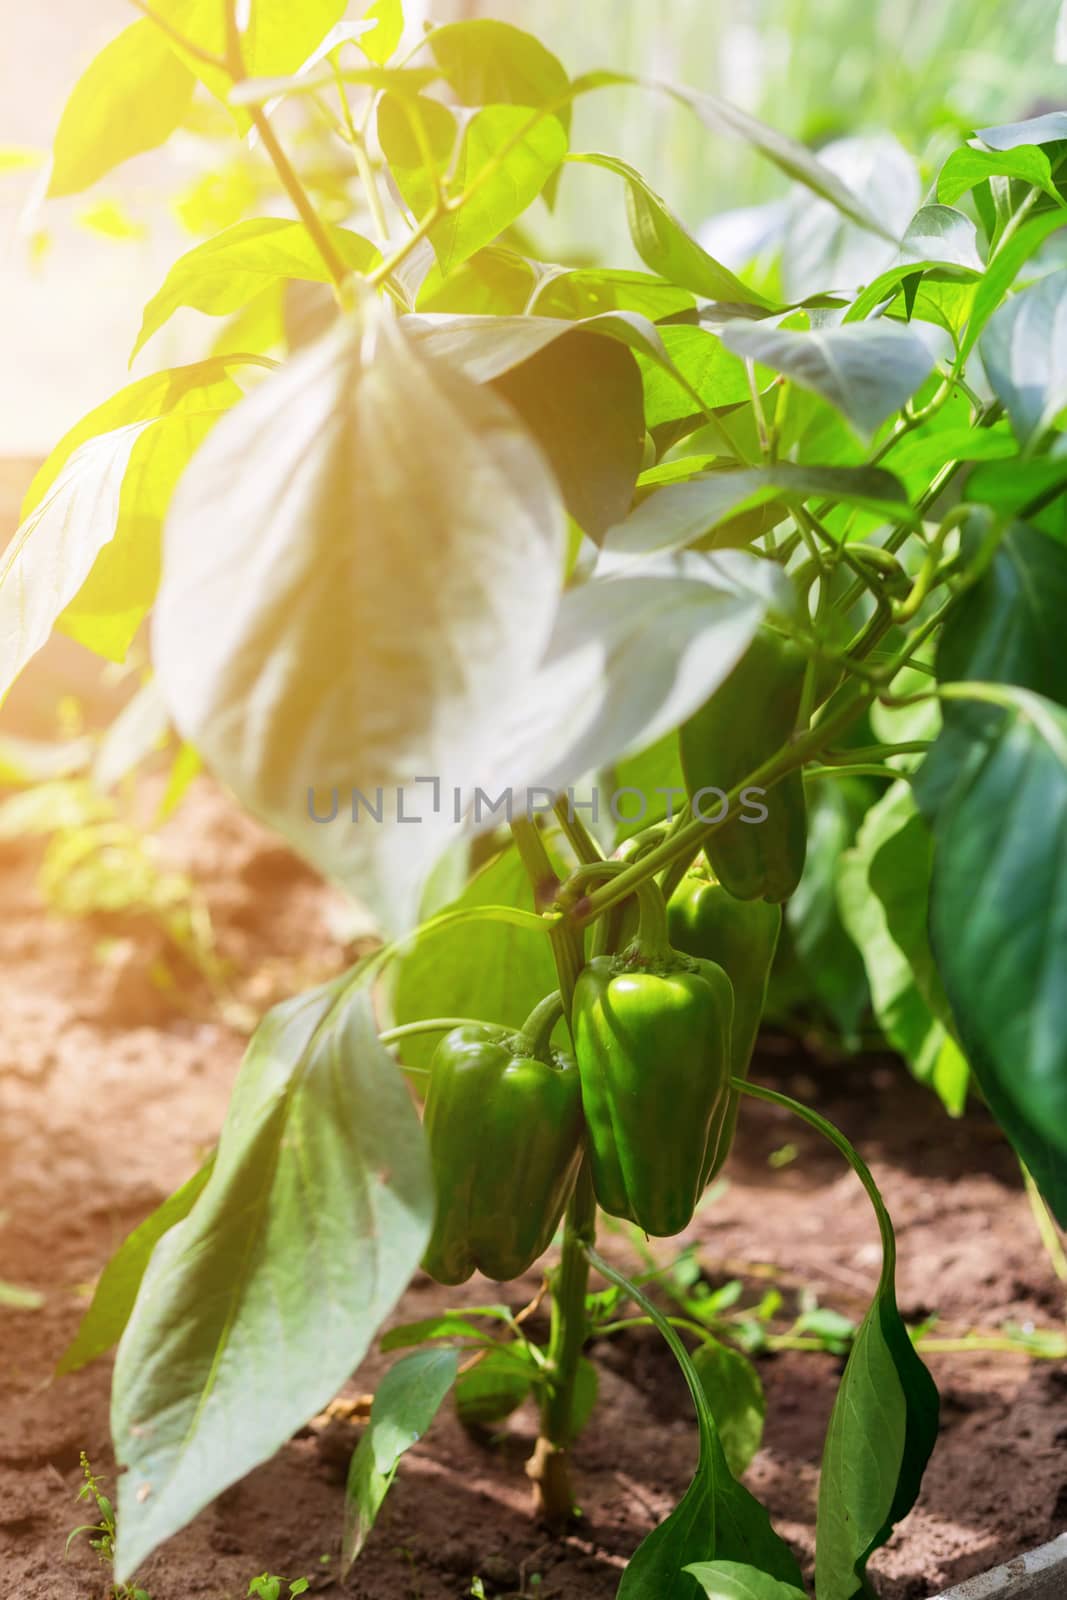 Hot green peppers grow in greenhouse. Green leaves with sunlight. Fix organic vegetables in kitchen garden